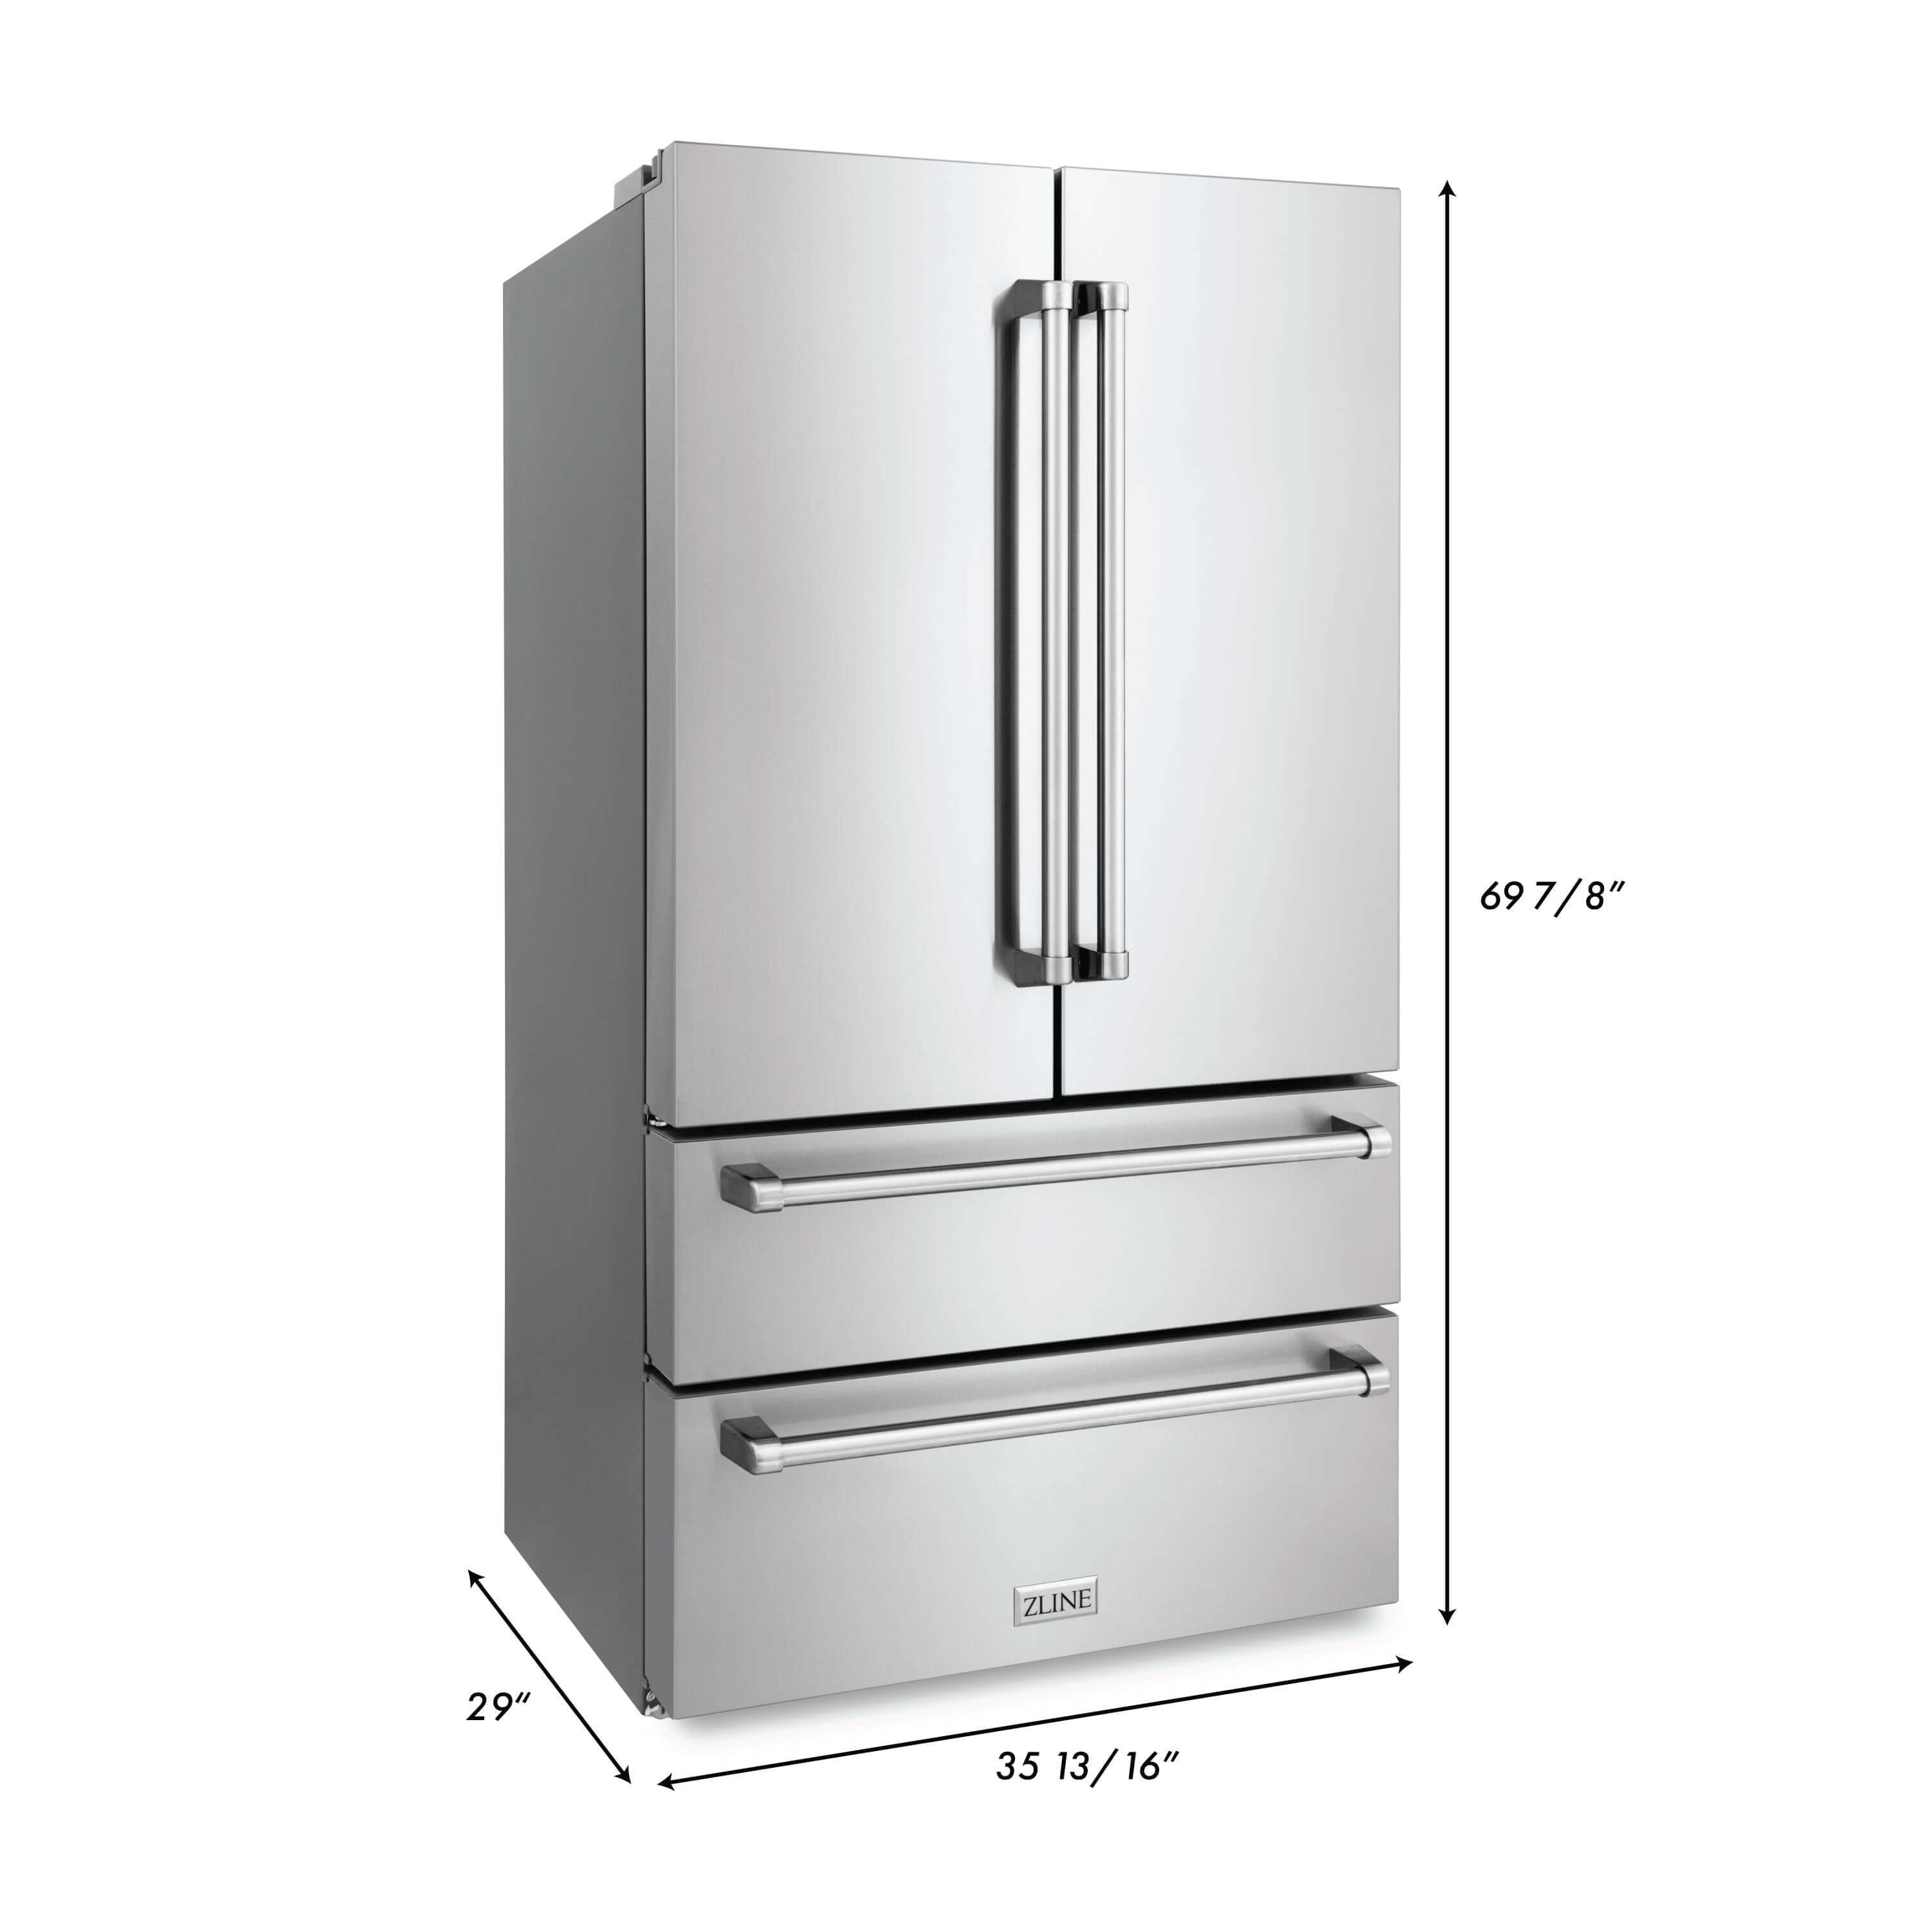 ZLINE 36 in. Freestanding French Door Refrigerator with Ice Maker in Fingerprint Resistant Stainless Steel (RFM-36) dimensional diagram with measurements.